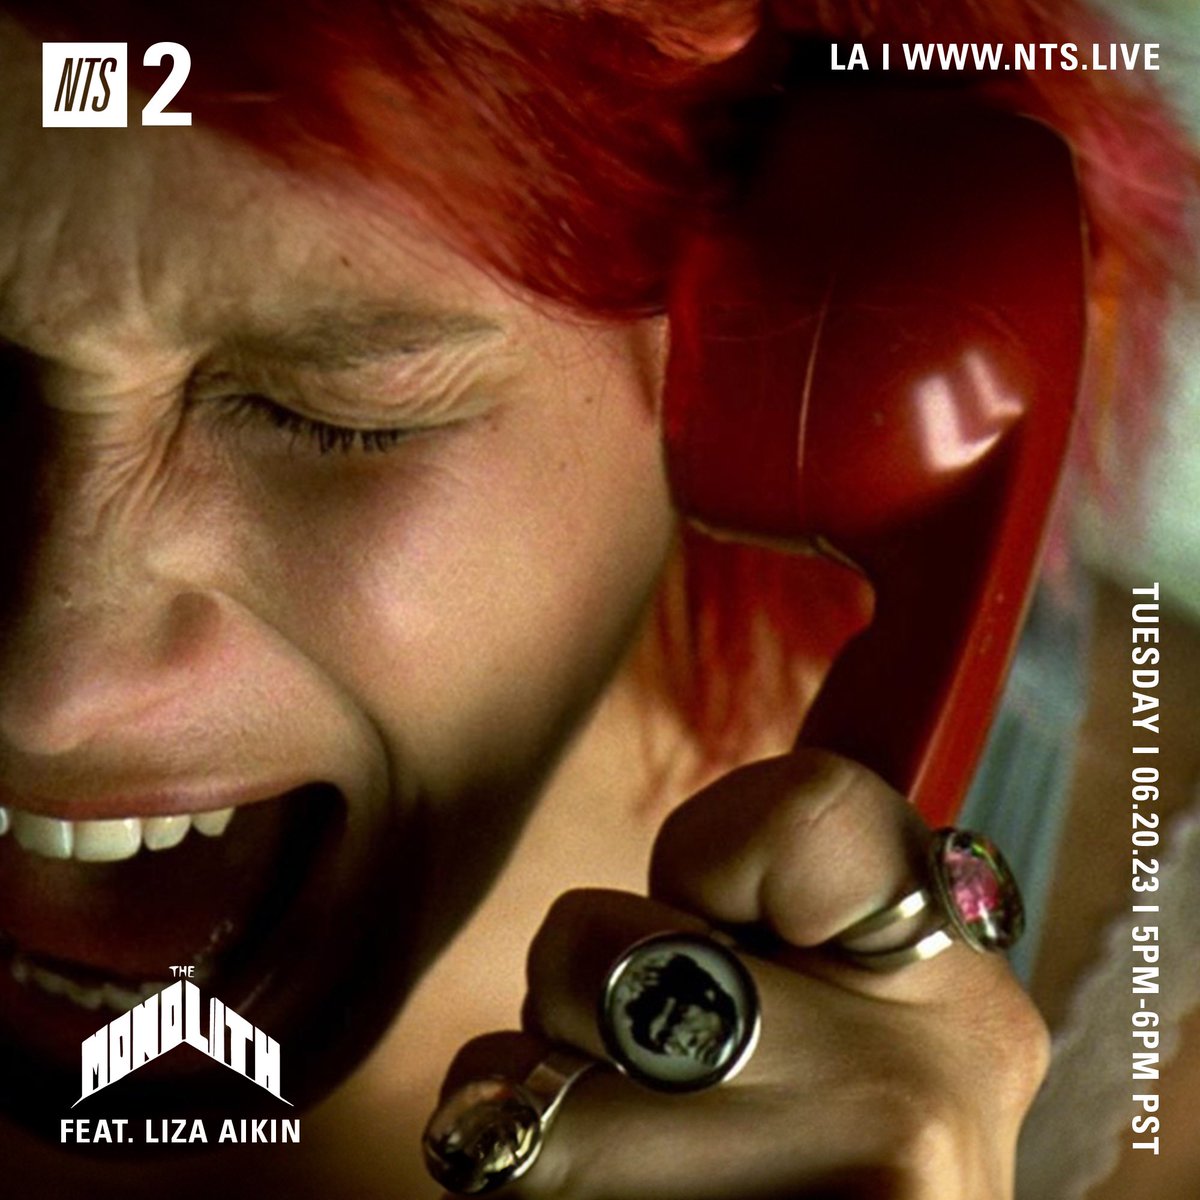 Live on @NTSlive till 6pm pst with guest Liza Aikin! nts.live Channel 2